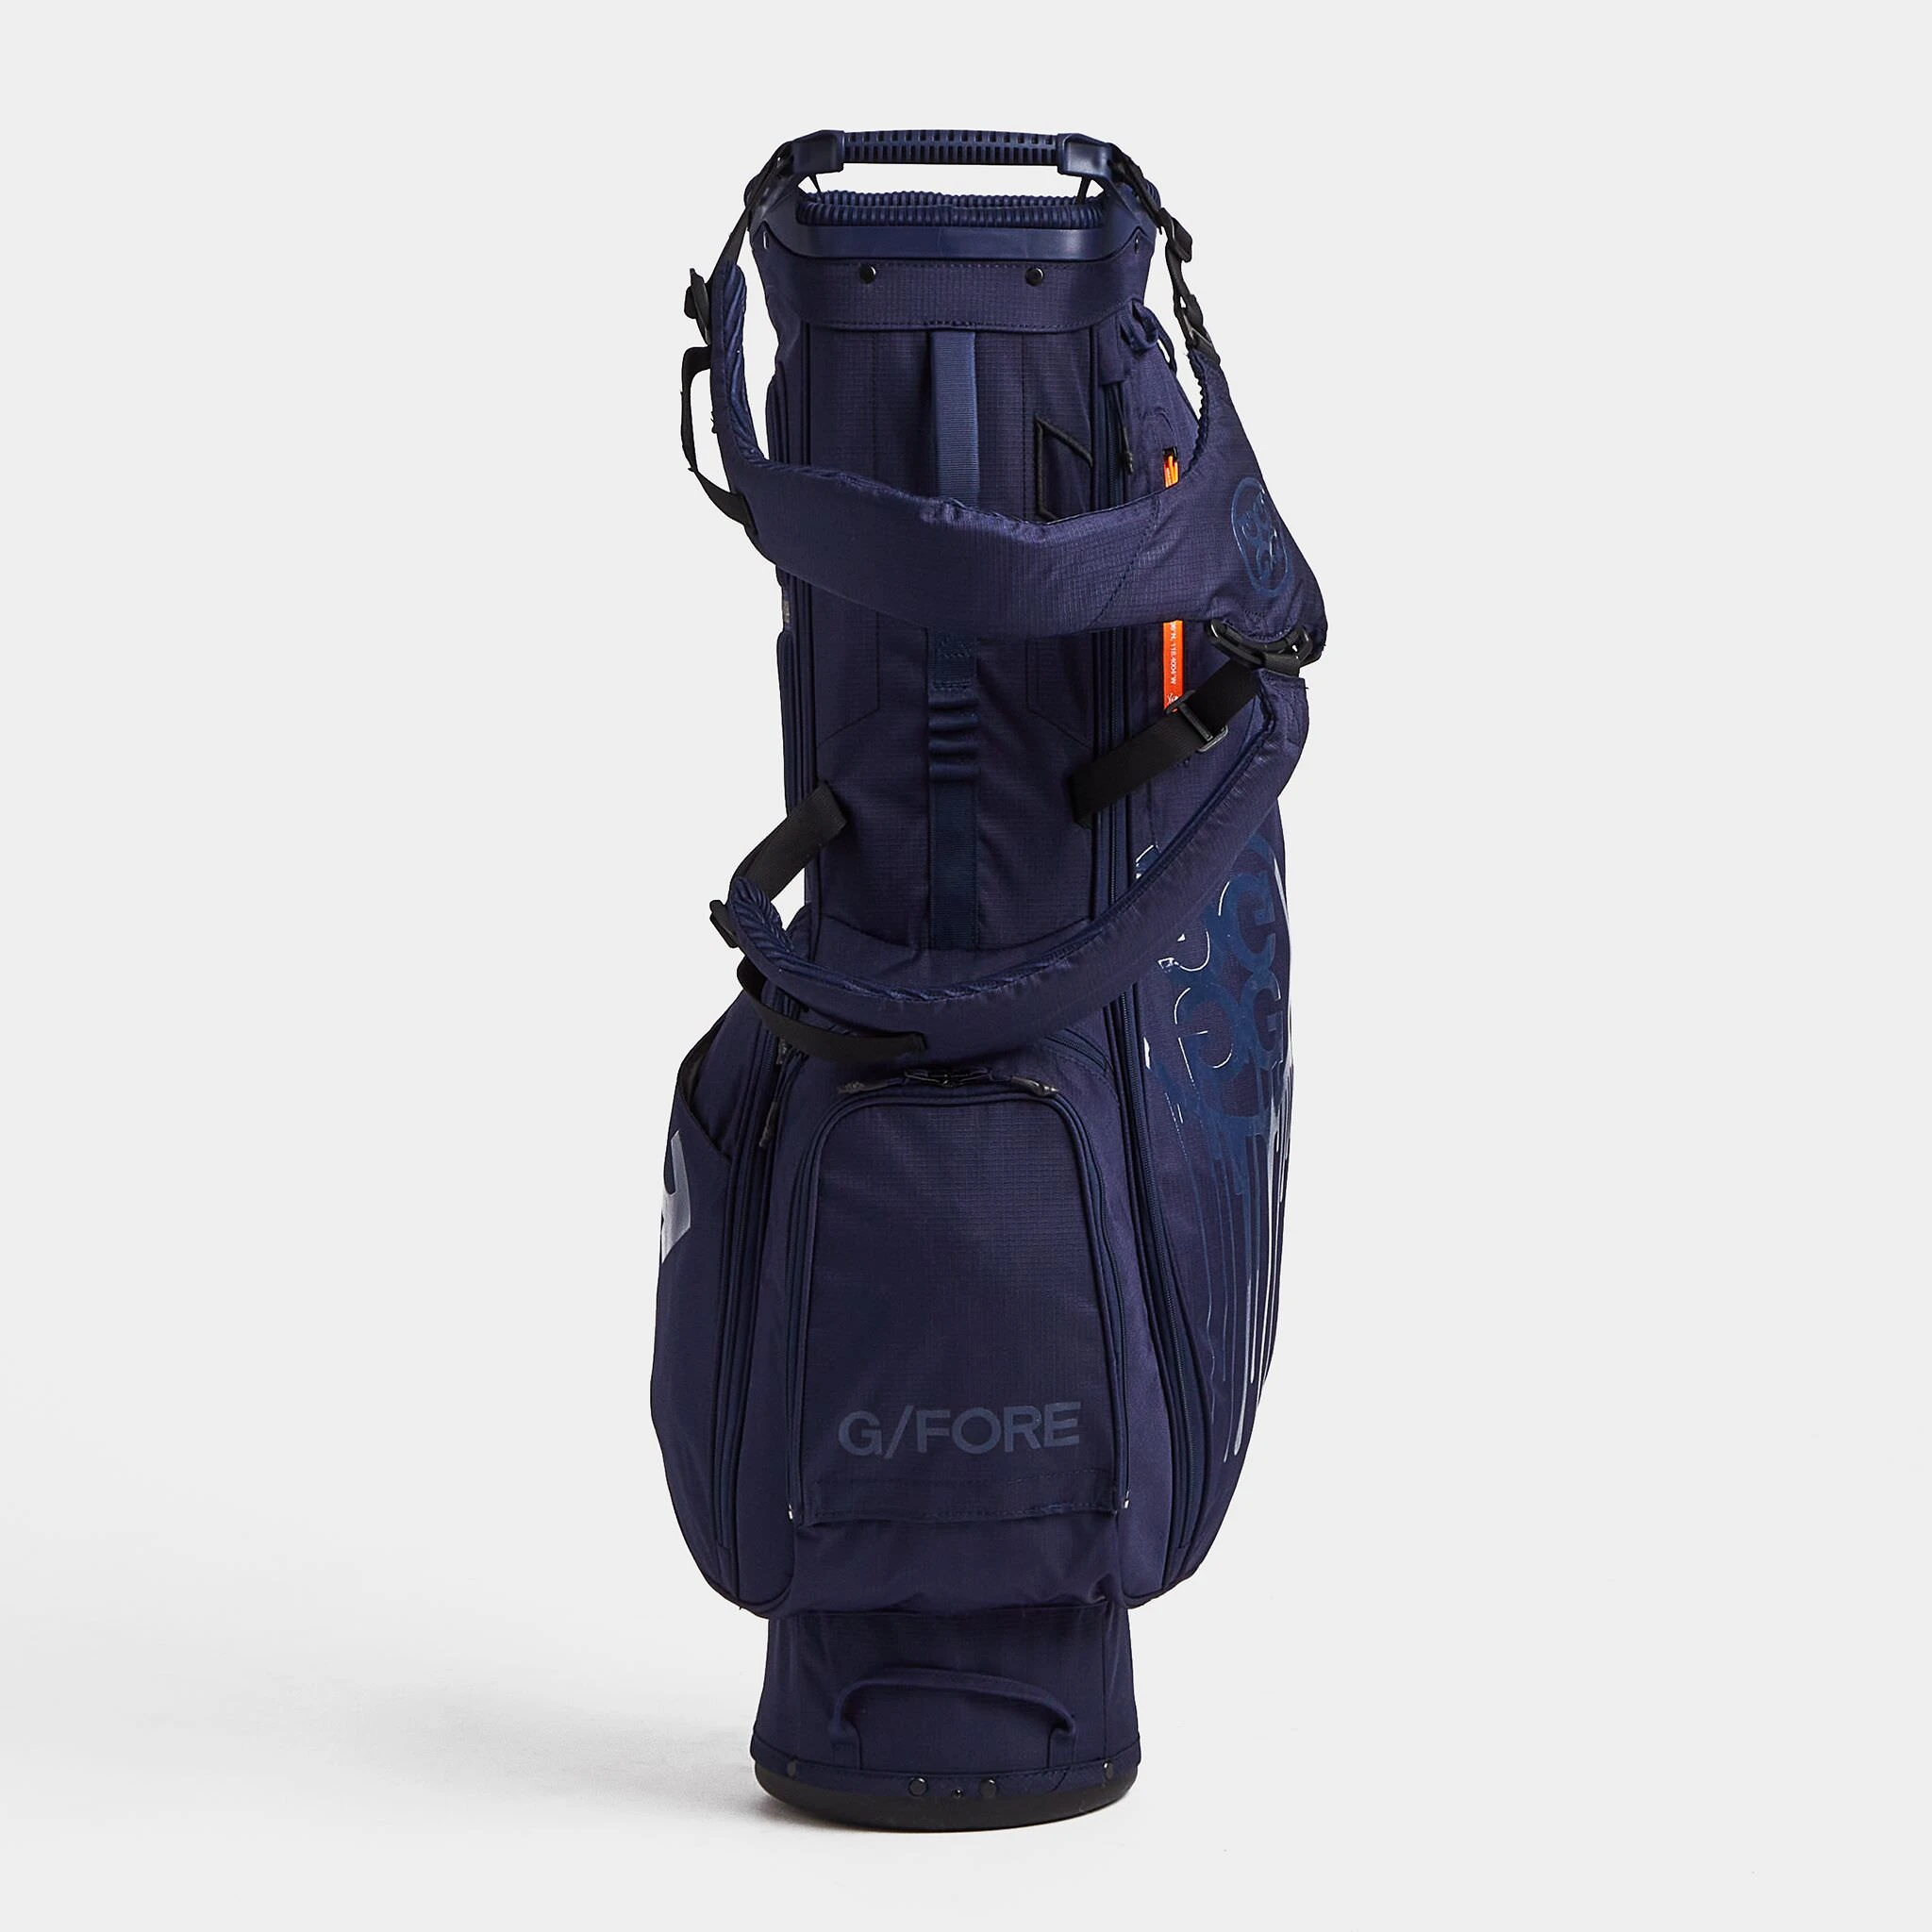 UNISEX CIRCLE G'S LIGHTWEIGHT CARRY GOLF BAG / G/FORE（ジーフォア 